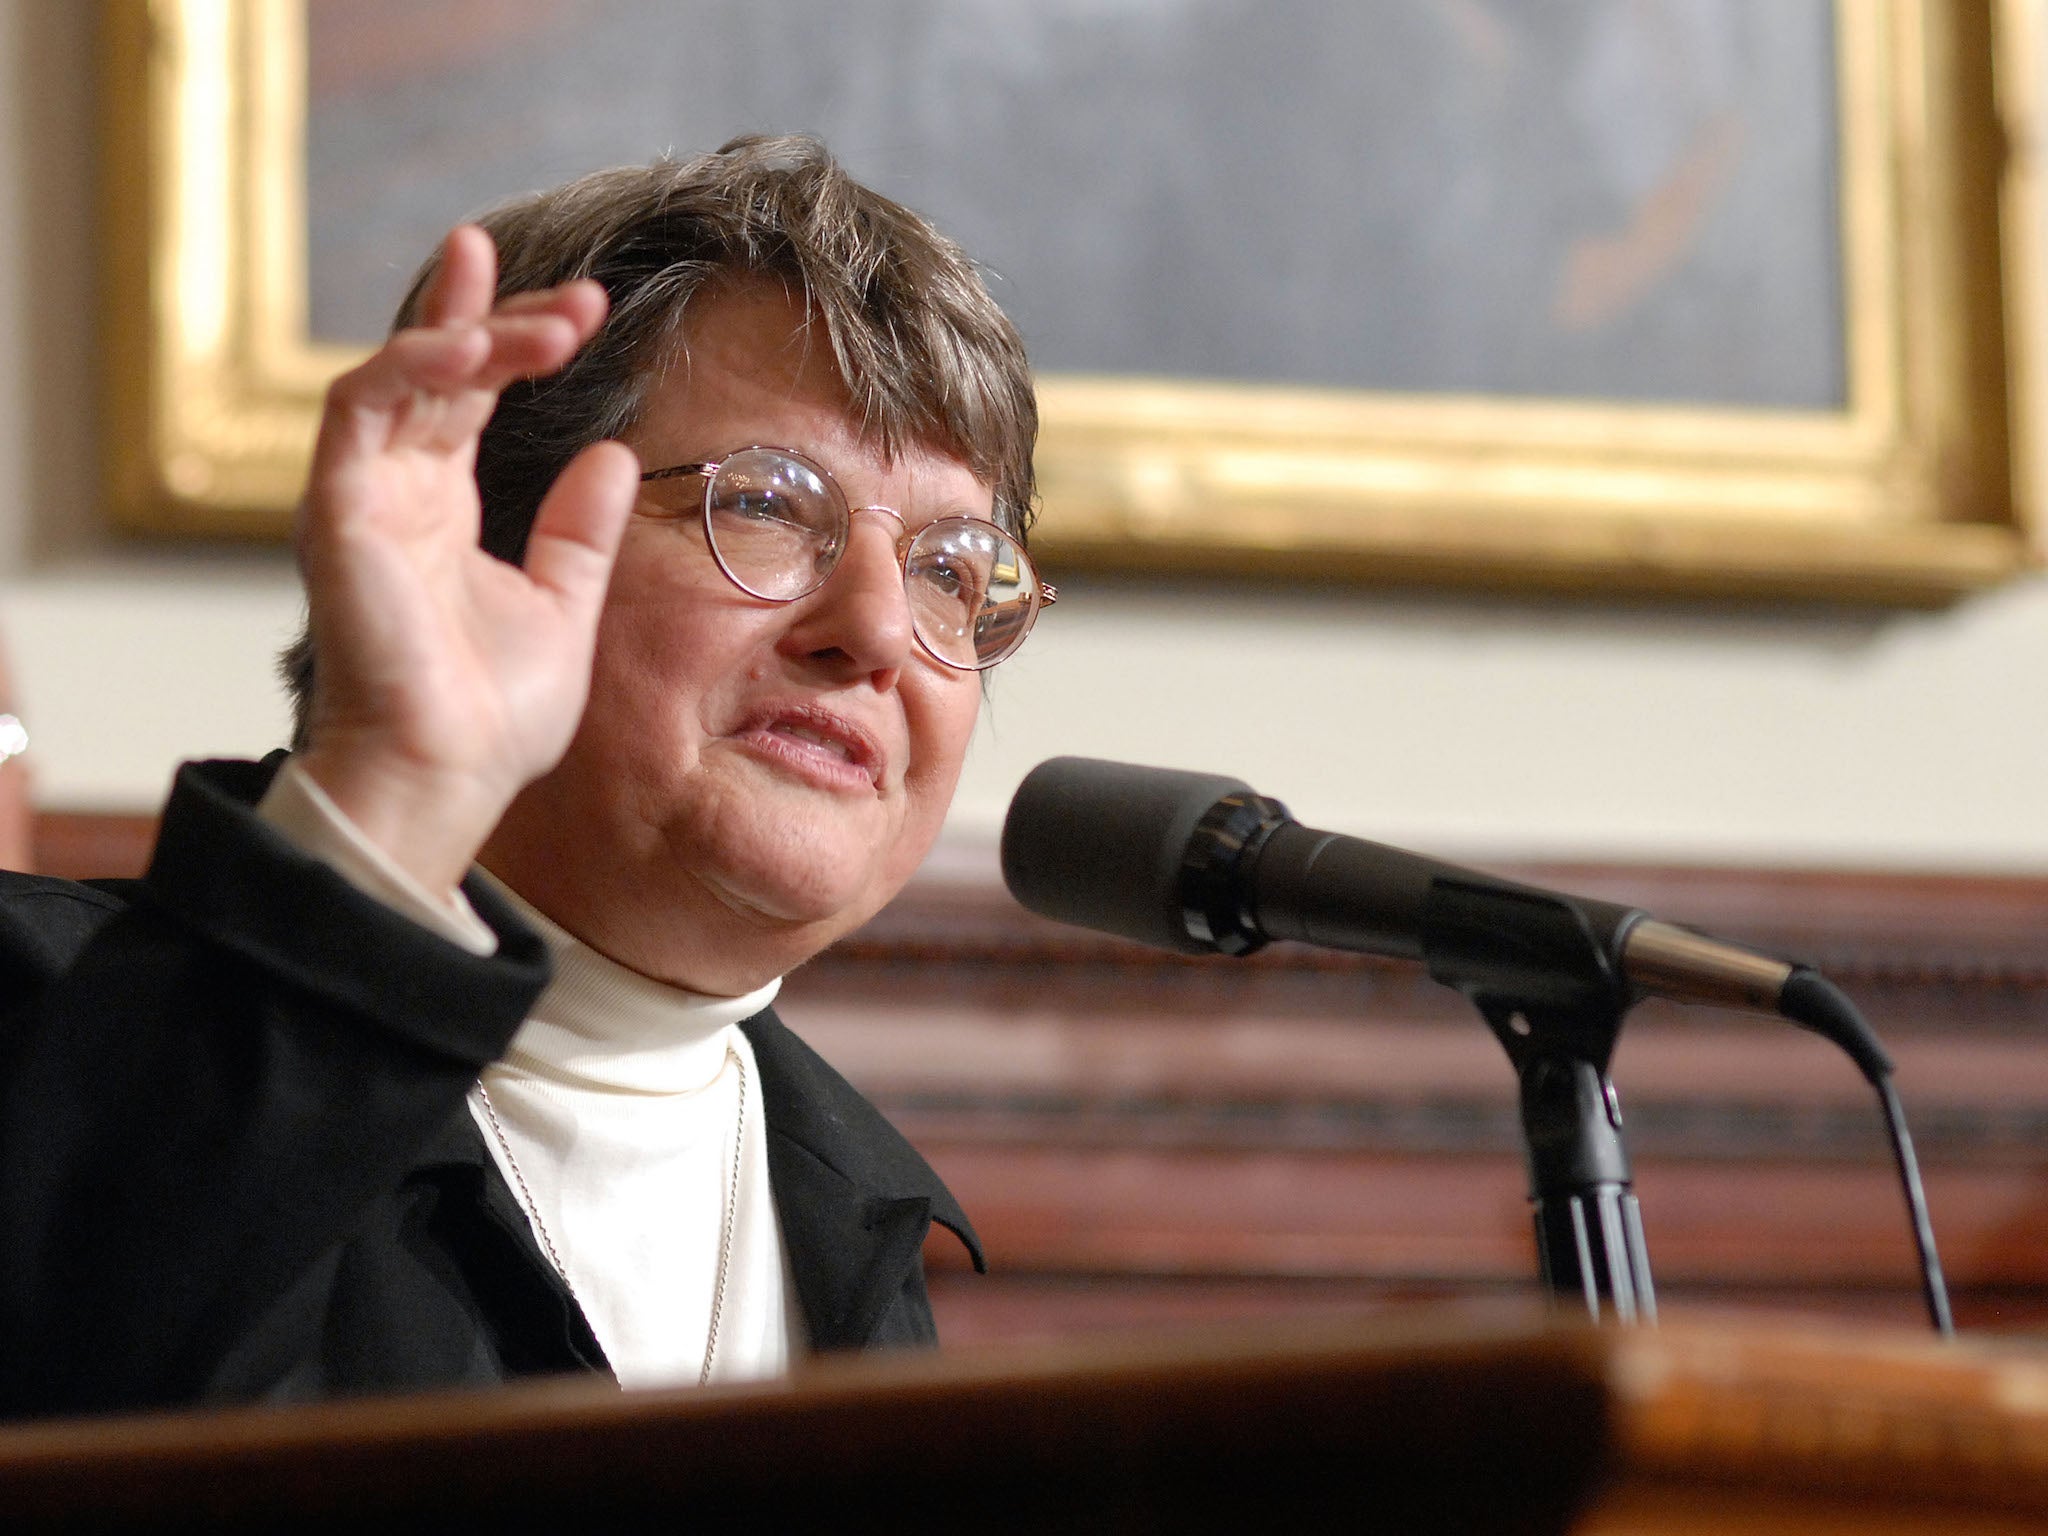 Sister Helen Prejean has called for Melissa Lucio’s life to be saved